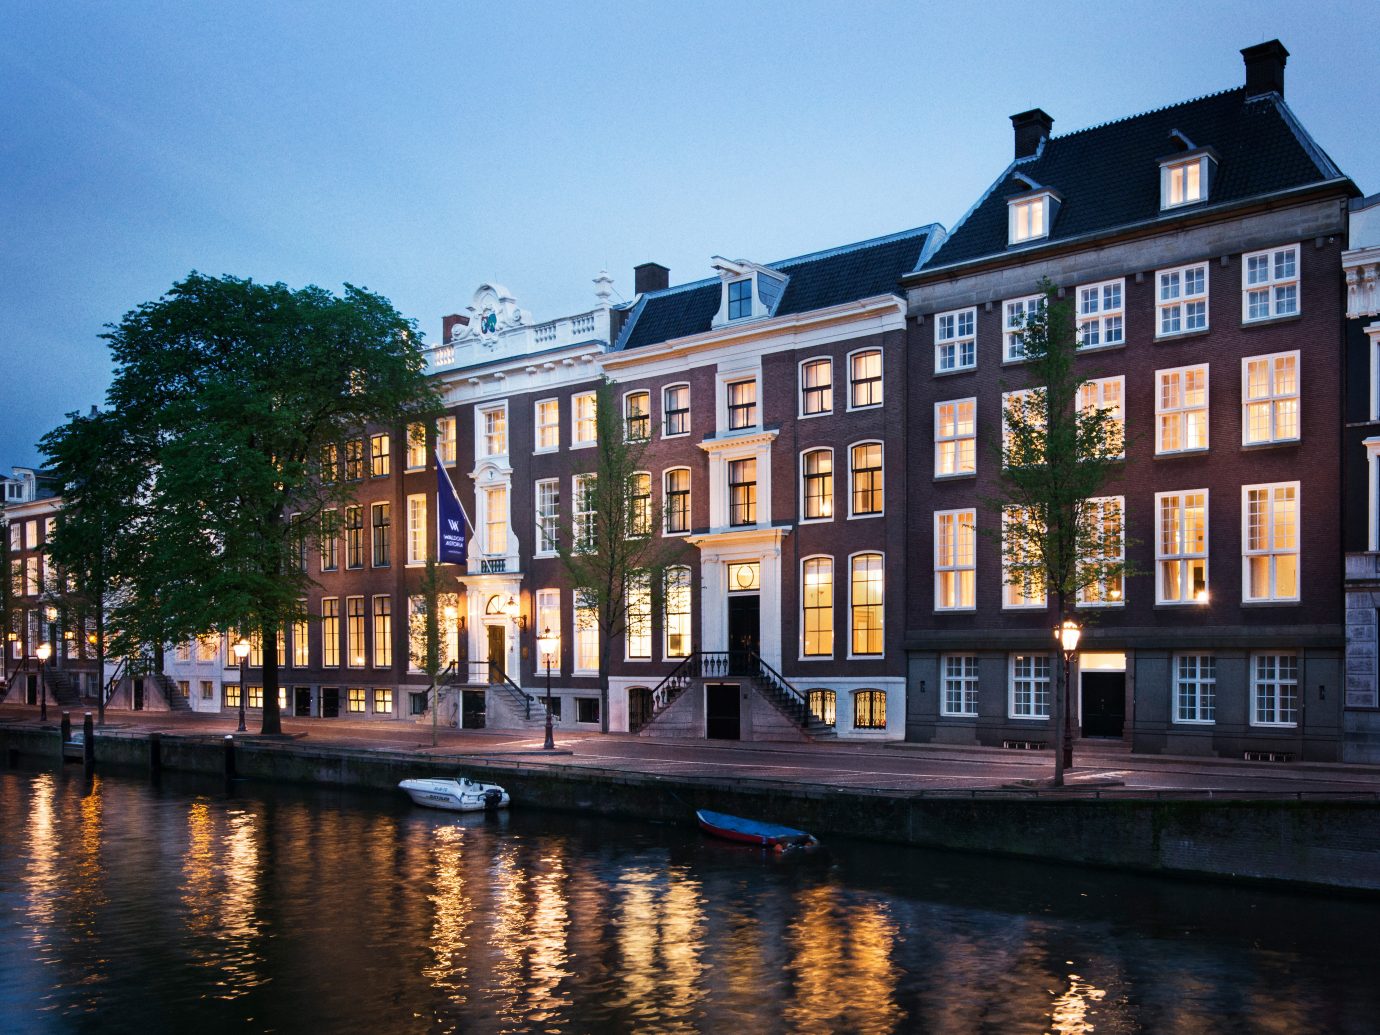 Amsterdam Architecture Buildings City Elegant Exterior Family Hotels Luxury Romantic The Netherlands Waterfront sky building outdoor water Canal waterway body of water Town landmark reflection house evening estate cityscape several